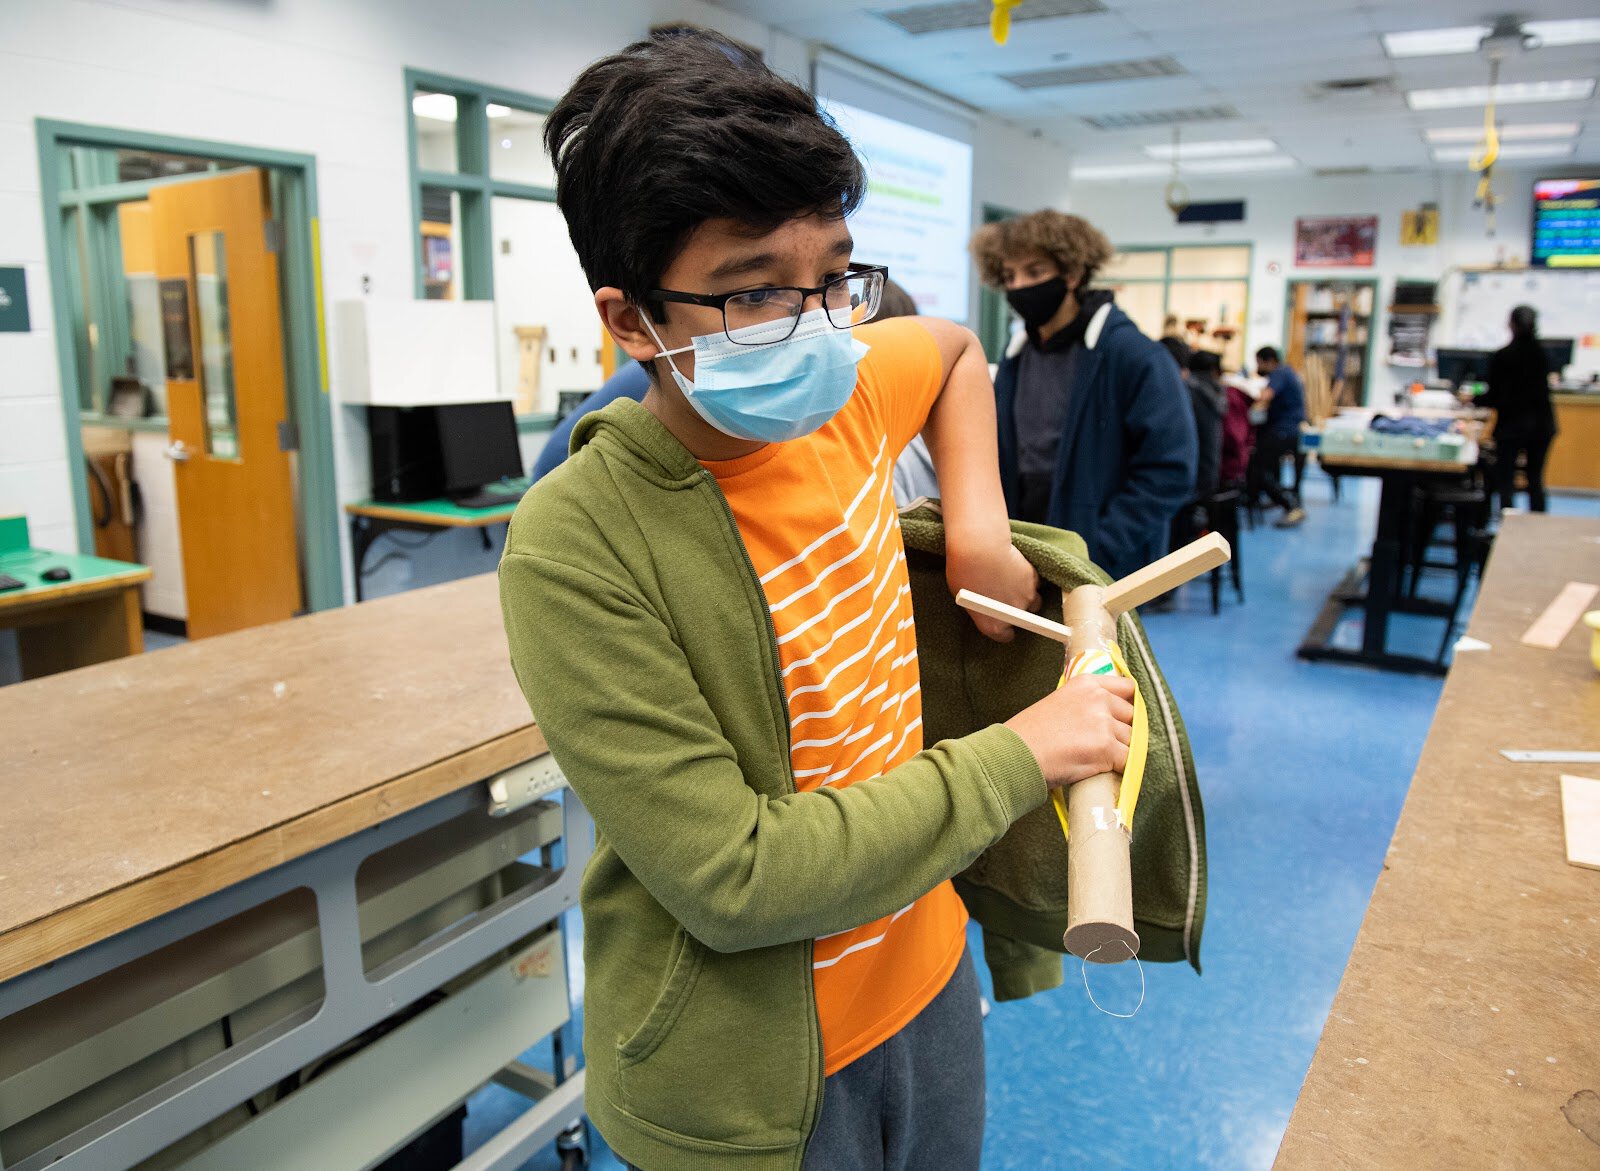 A "dressing stick" created by an Engineering 3 elective student at Carson MS is intended to help people with mobility restrictions dress themselves.